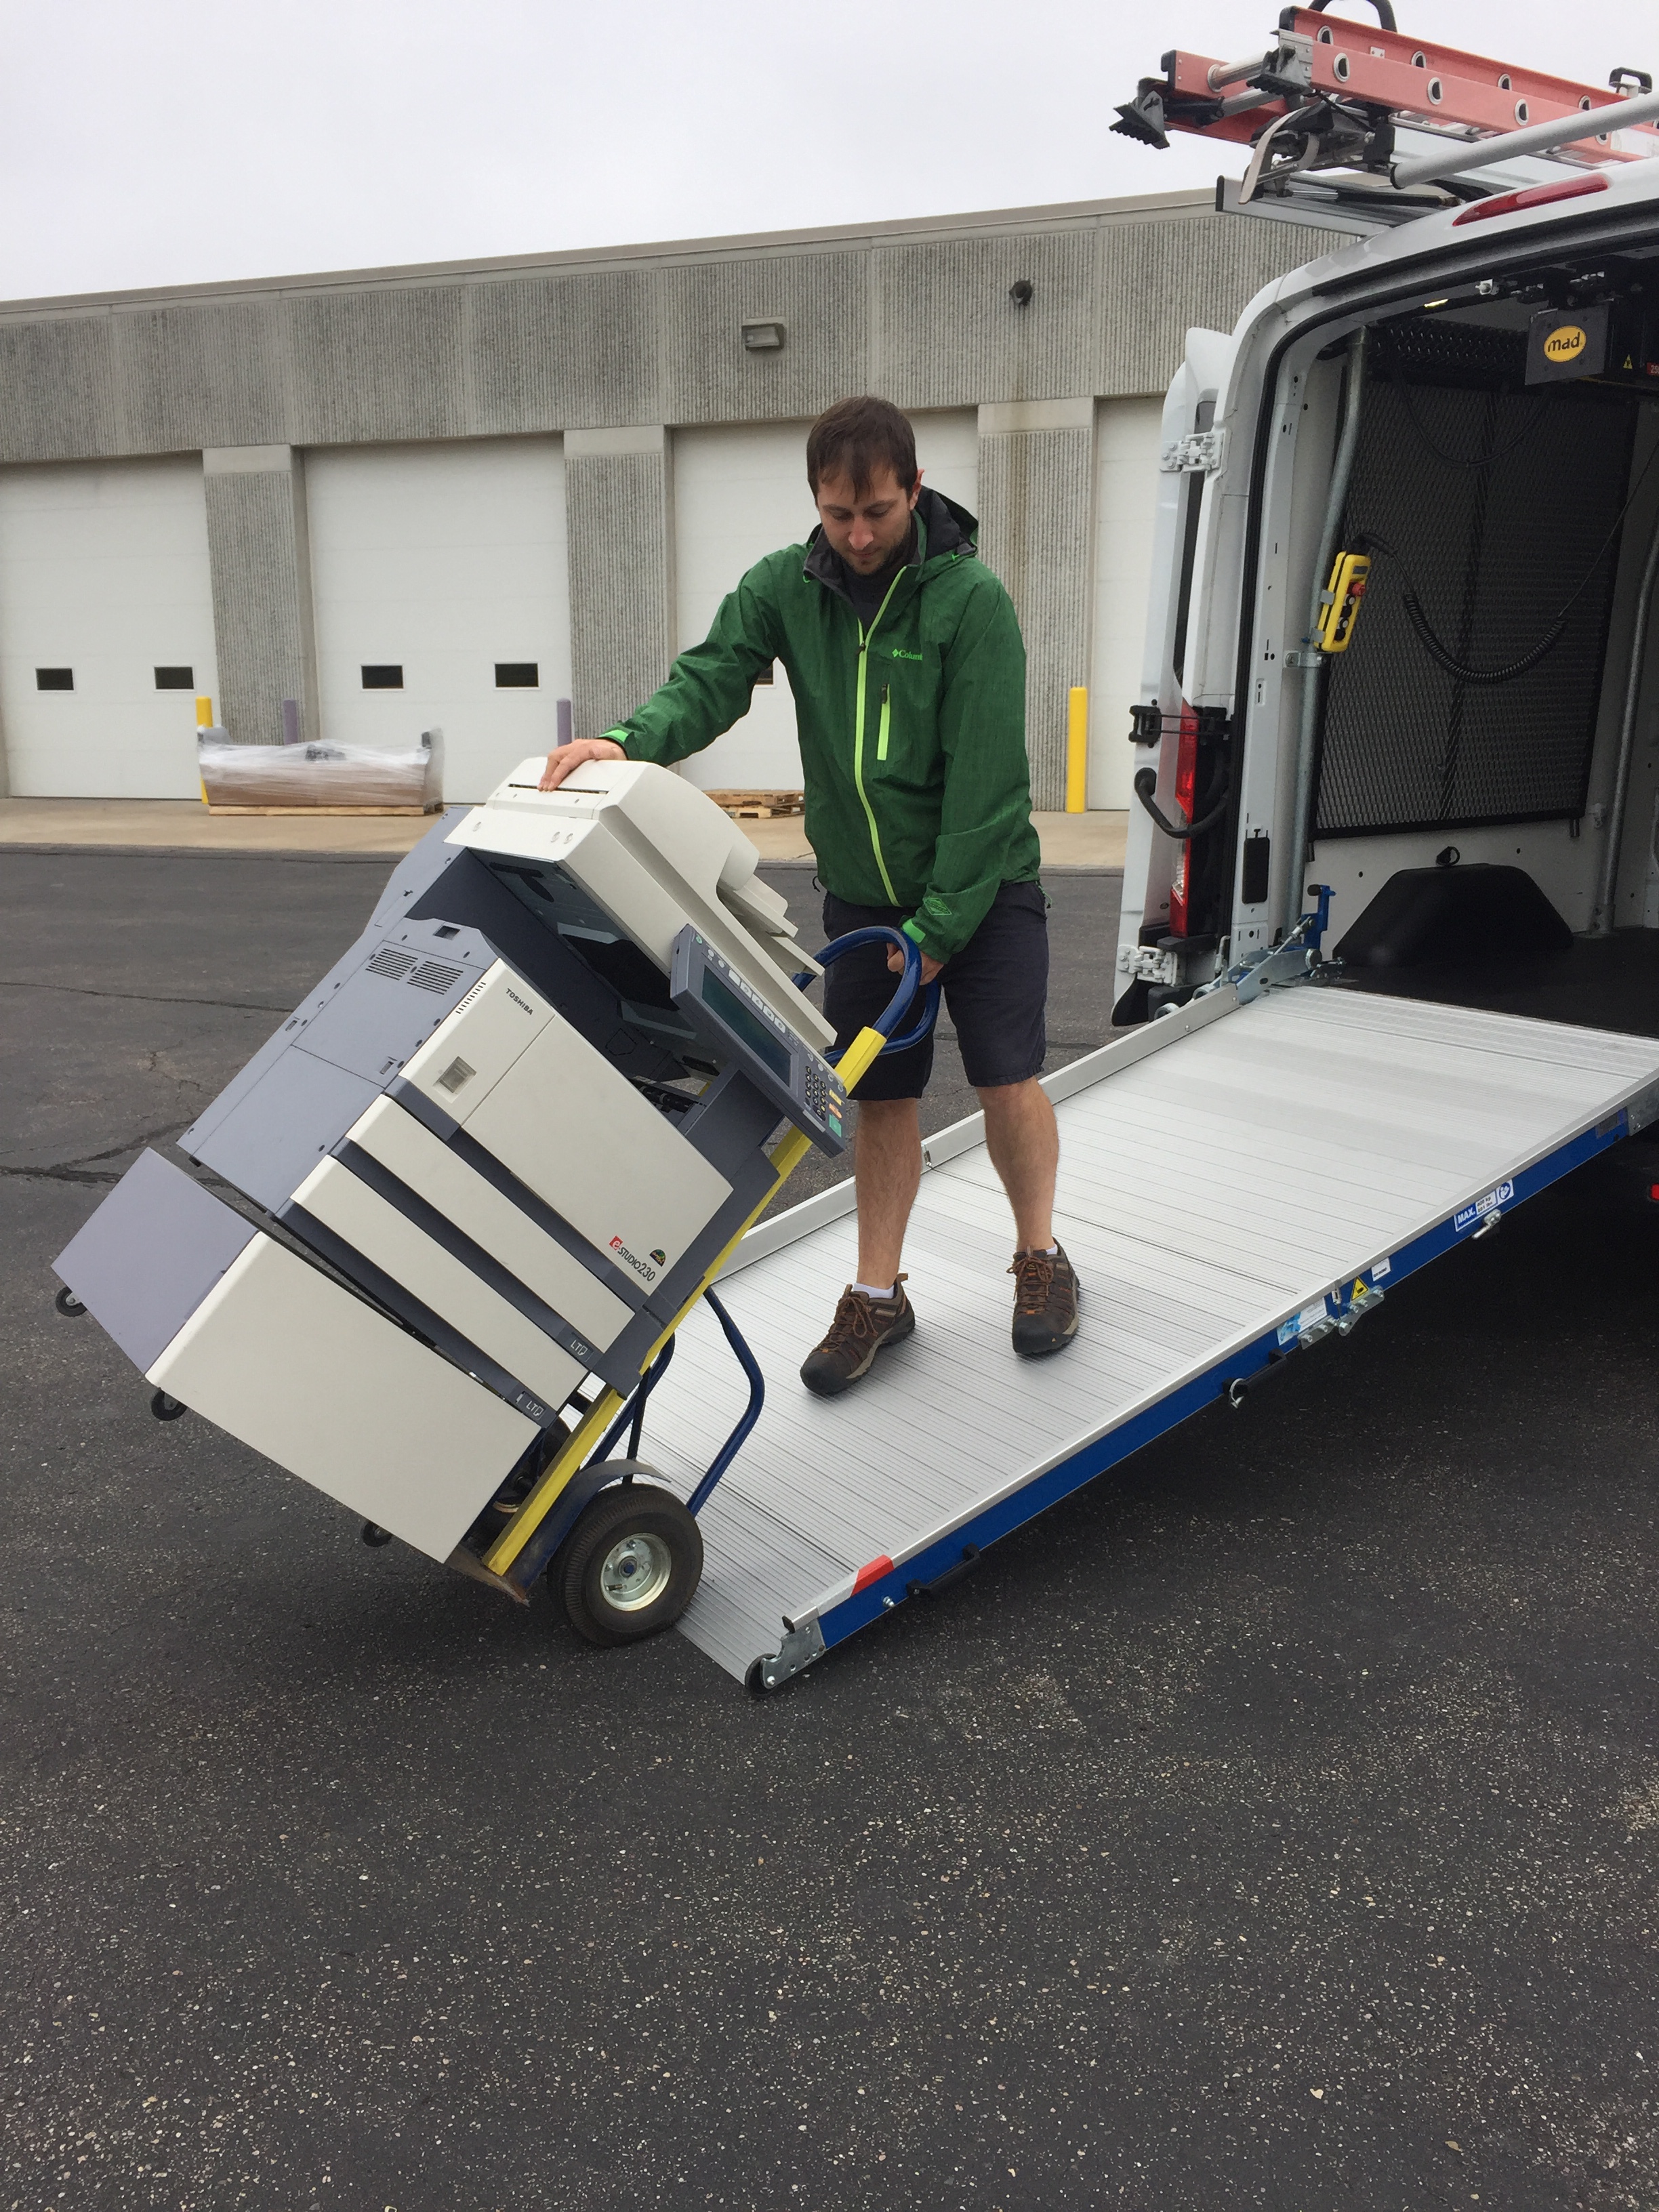 WM System Loading Ramps come in two-panel configurations in lengths of between 98 and 128 inches, and three-panel configurations in lengths of up to 16 feet.